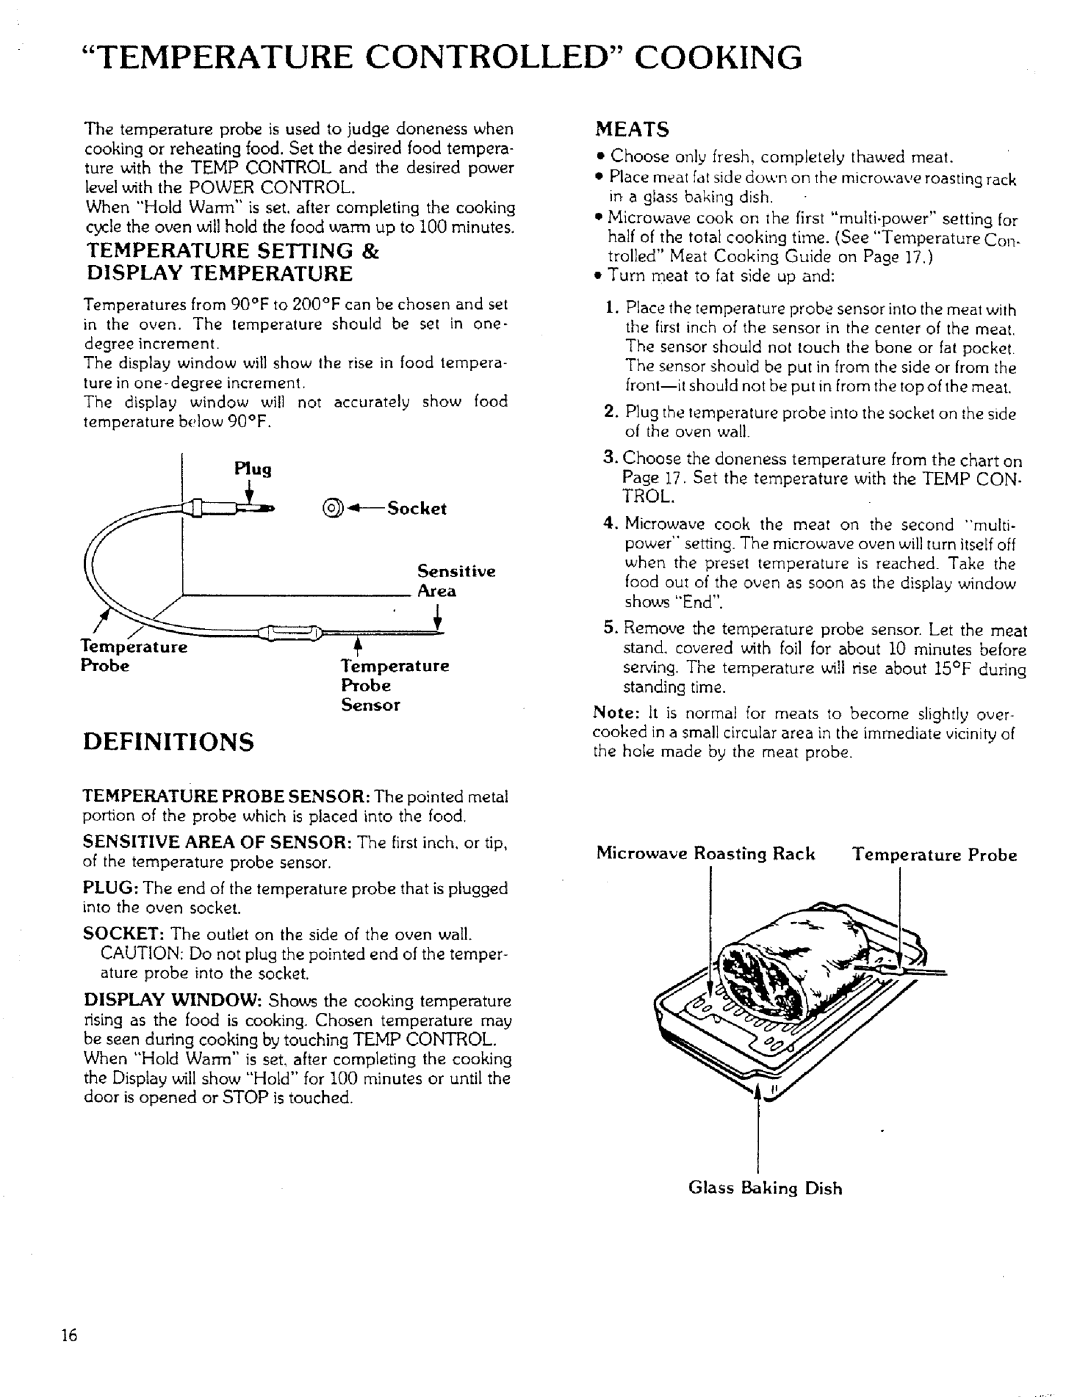 Sears 85951 manual Temperature Controlled Cooking, Definitions, Meats, Microwave Roasting Rack Temperature Probe 